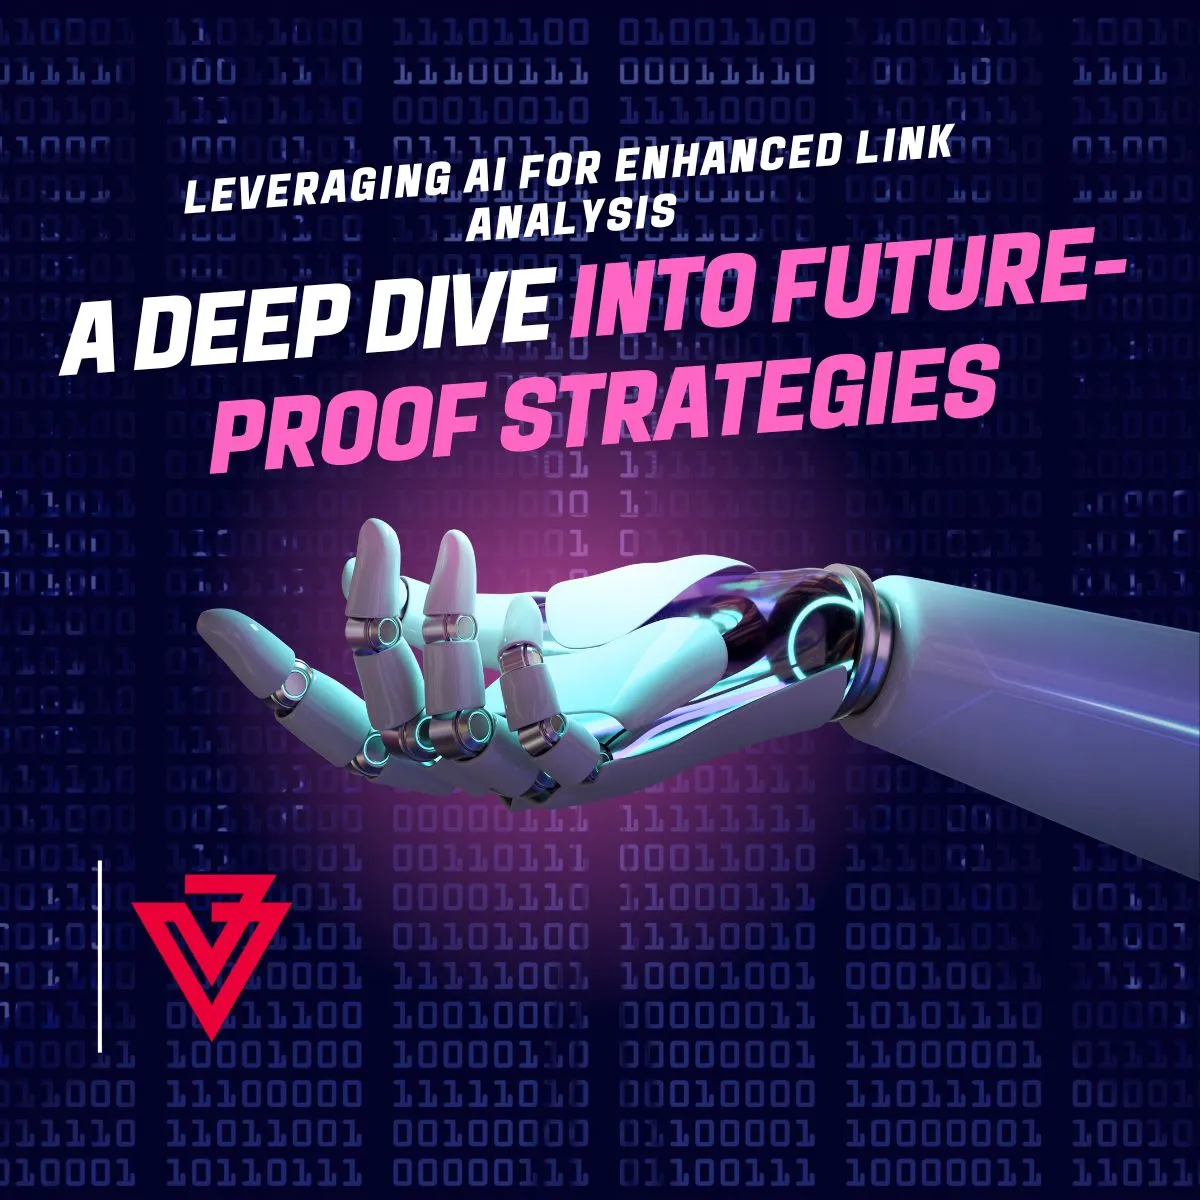 Leveraging AI for Enhanced Link Analysis: A Deep Dive into Future-Proof Strategies